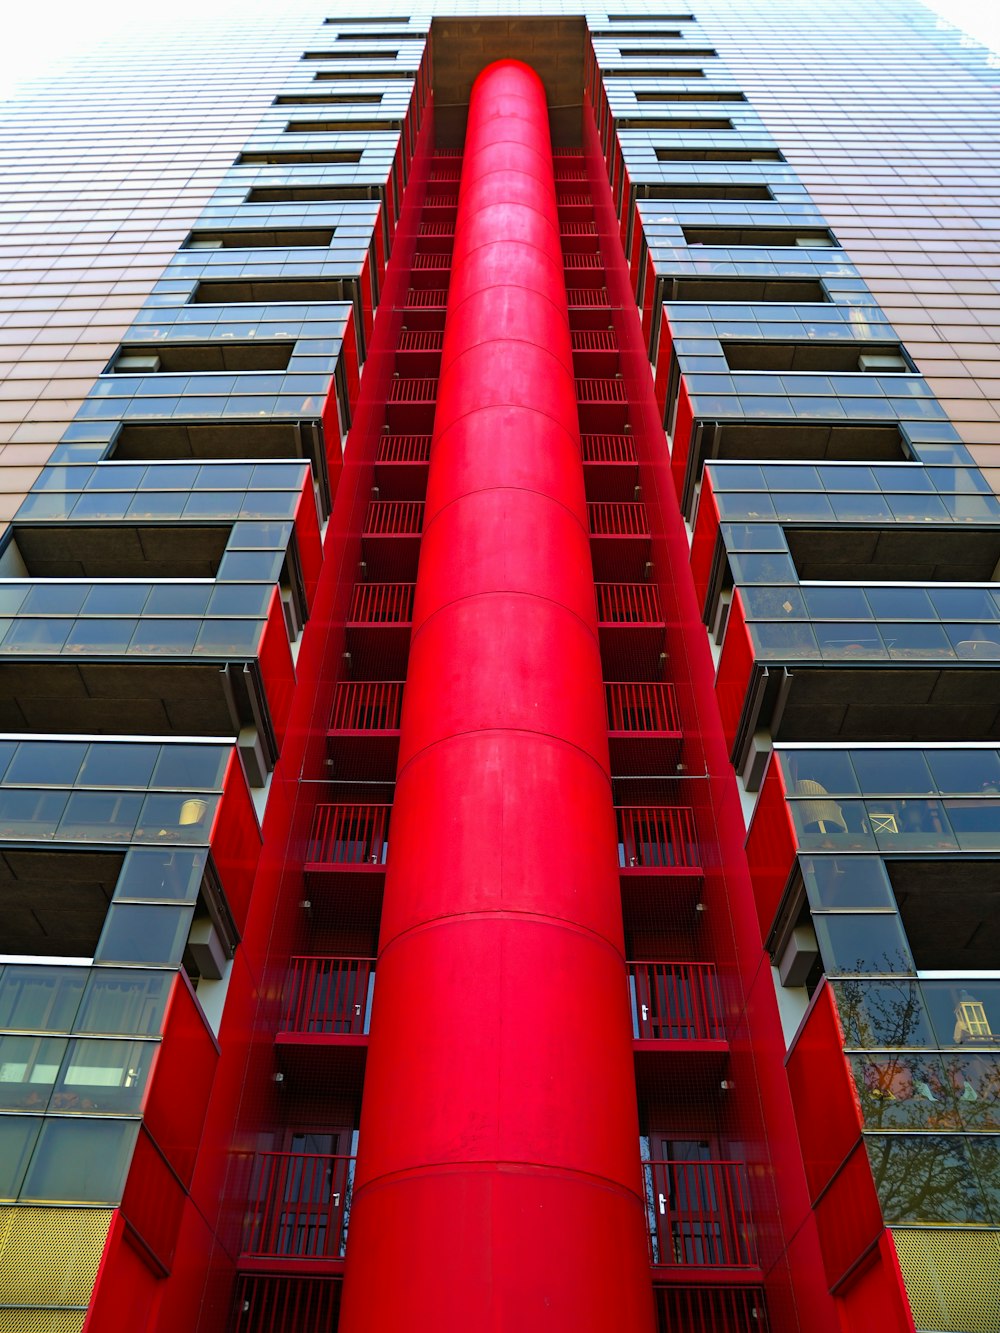 a tall red building with balconies on the top